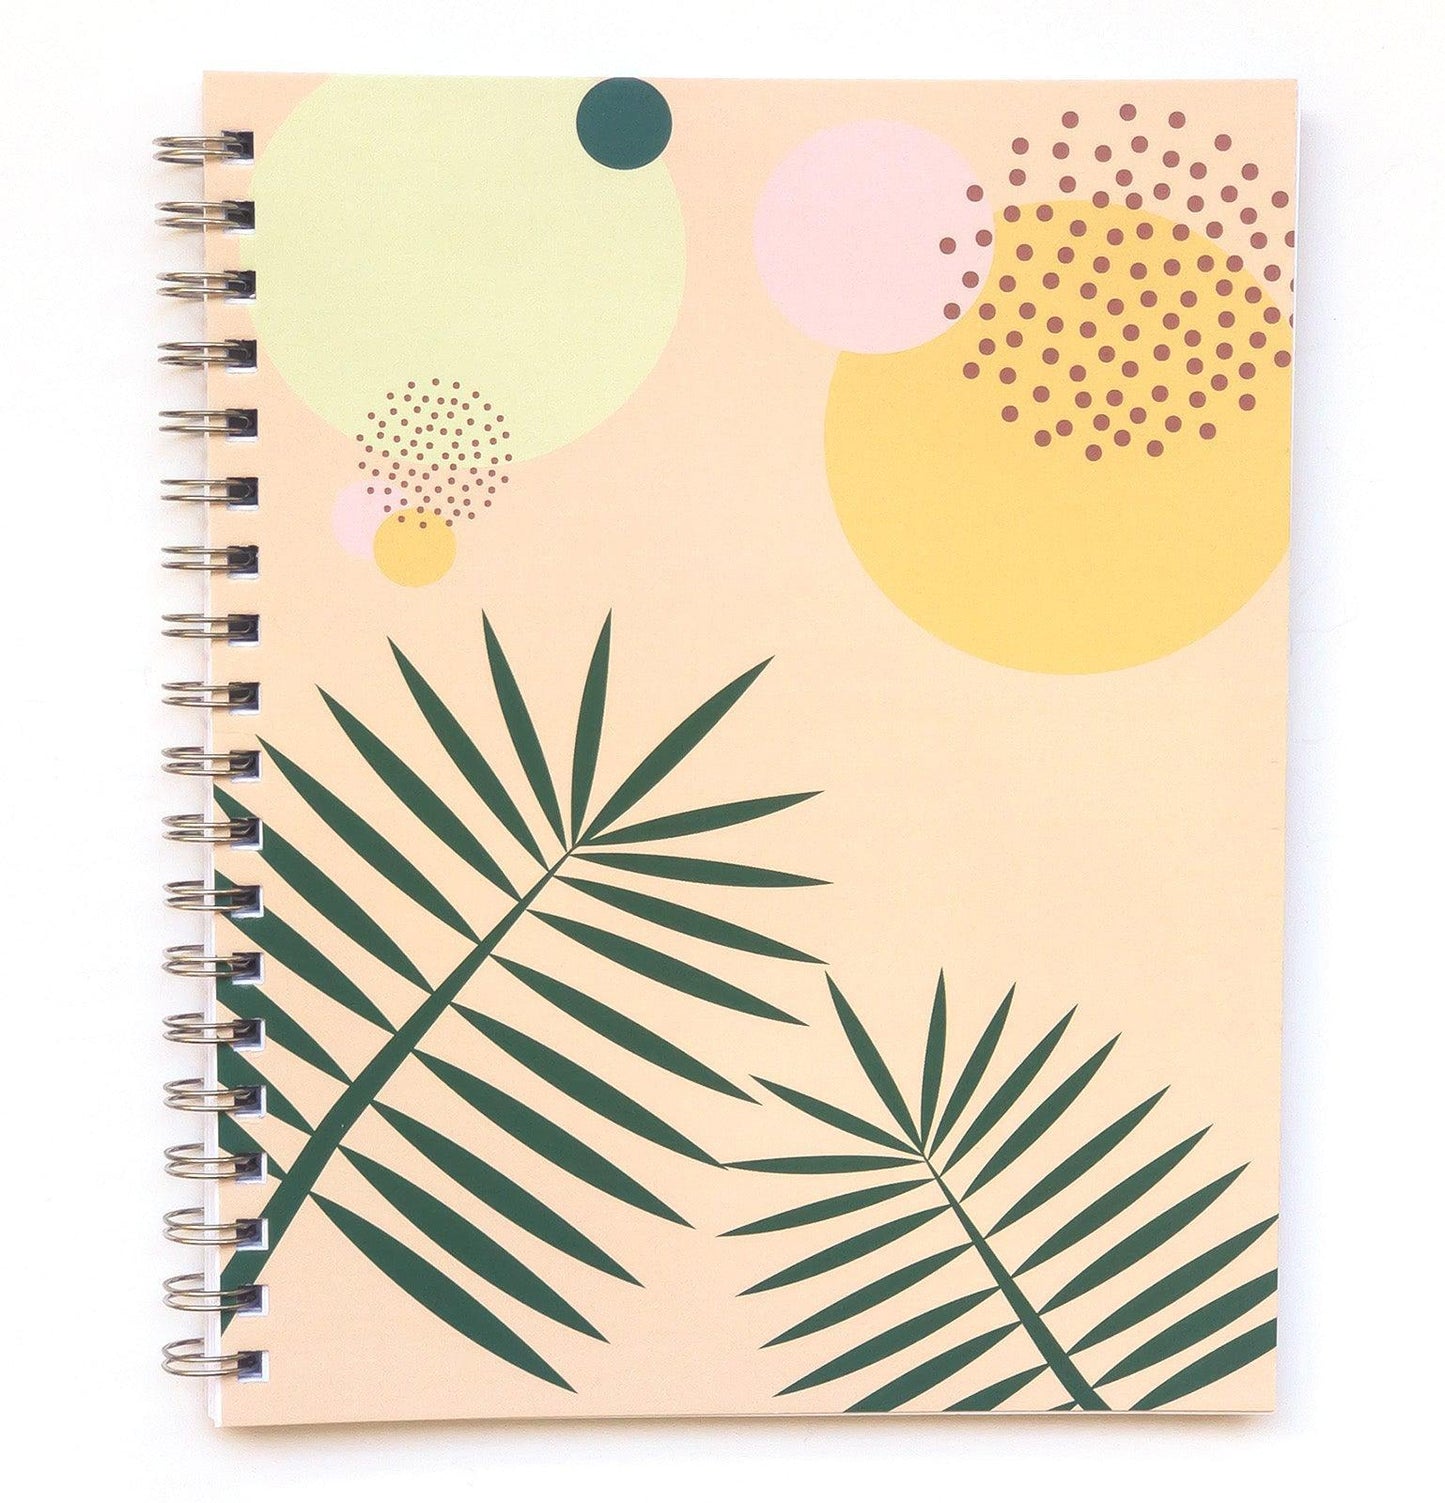 Cool and Calm Journal - front cover featuring palm leaves and neutral abstract figures